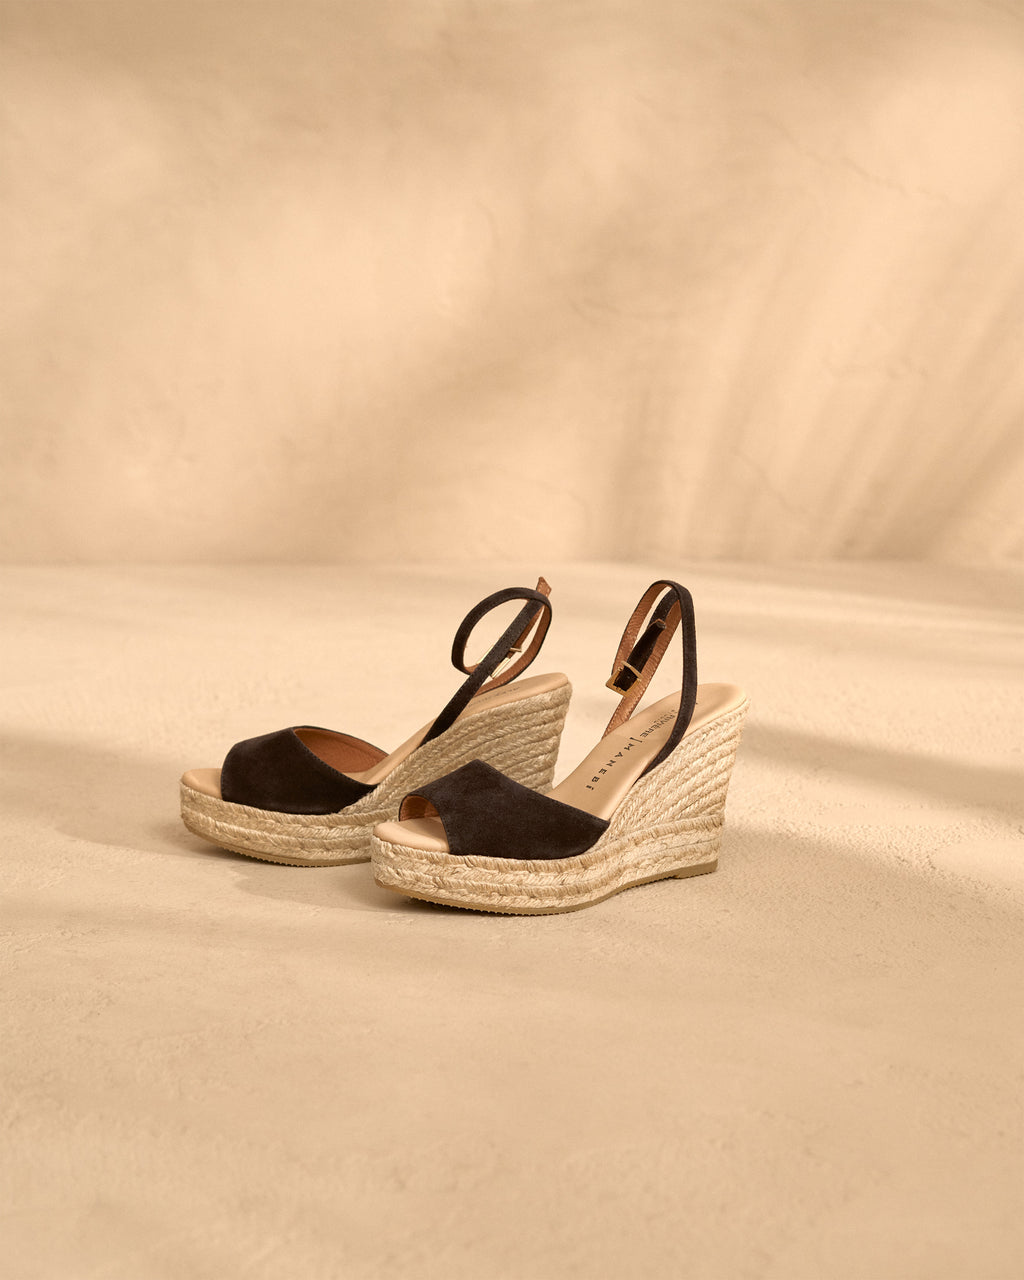 Viky Soft Suede Wedge Espadrilles - Open Toe - Chocolate